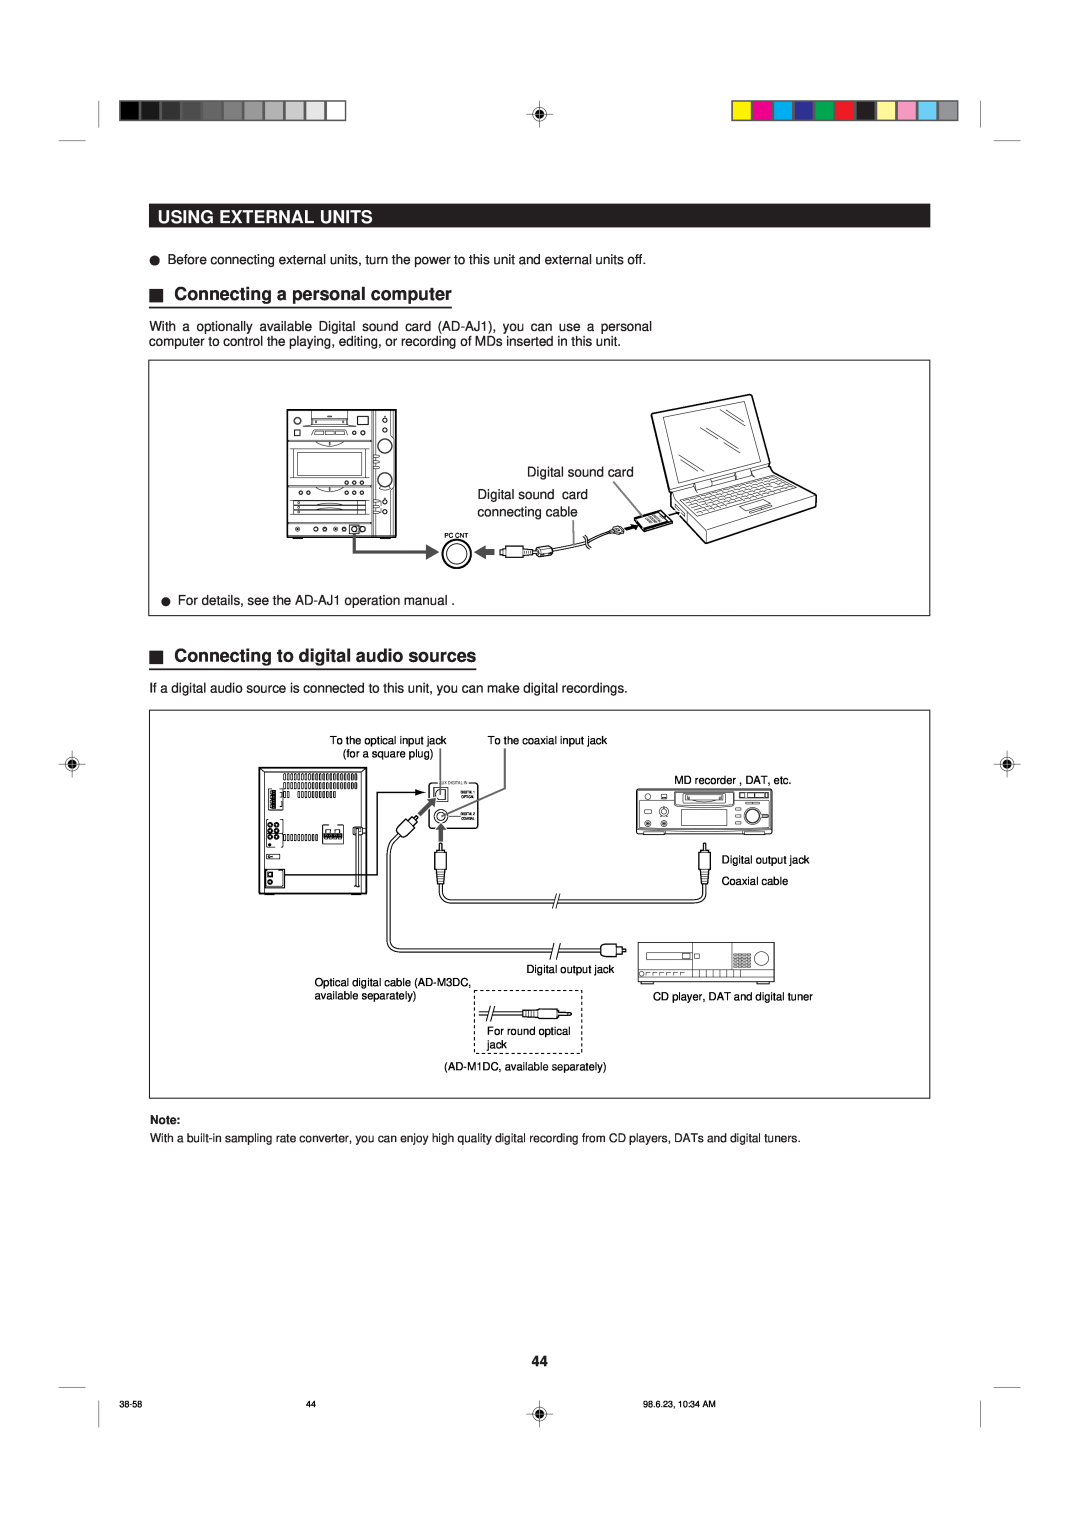 Sharp MD-X8 operation manual Using External Units, HConnecting a personal computer, HConnecting to digital audio sources 